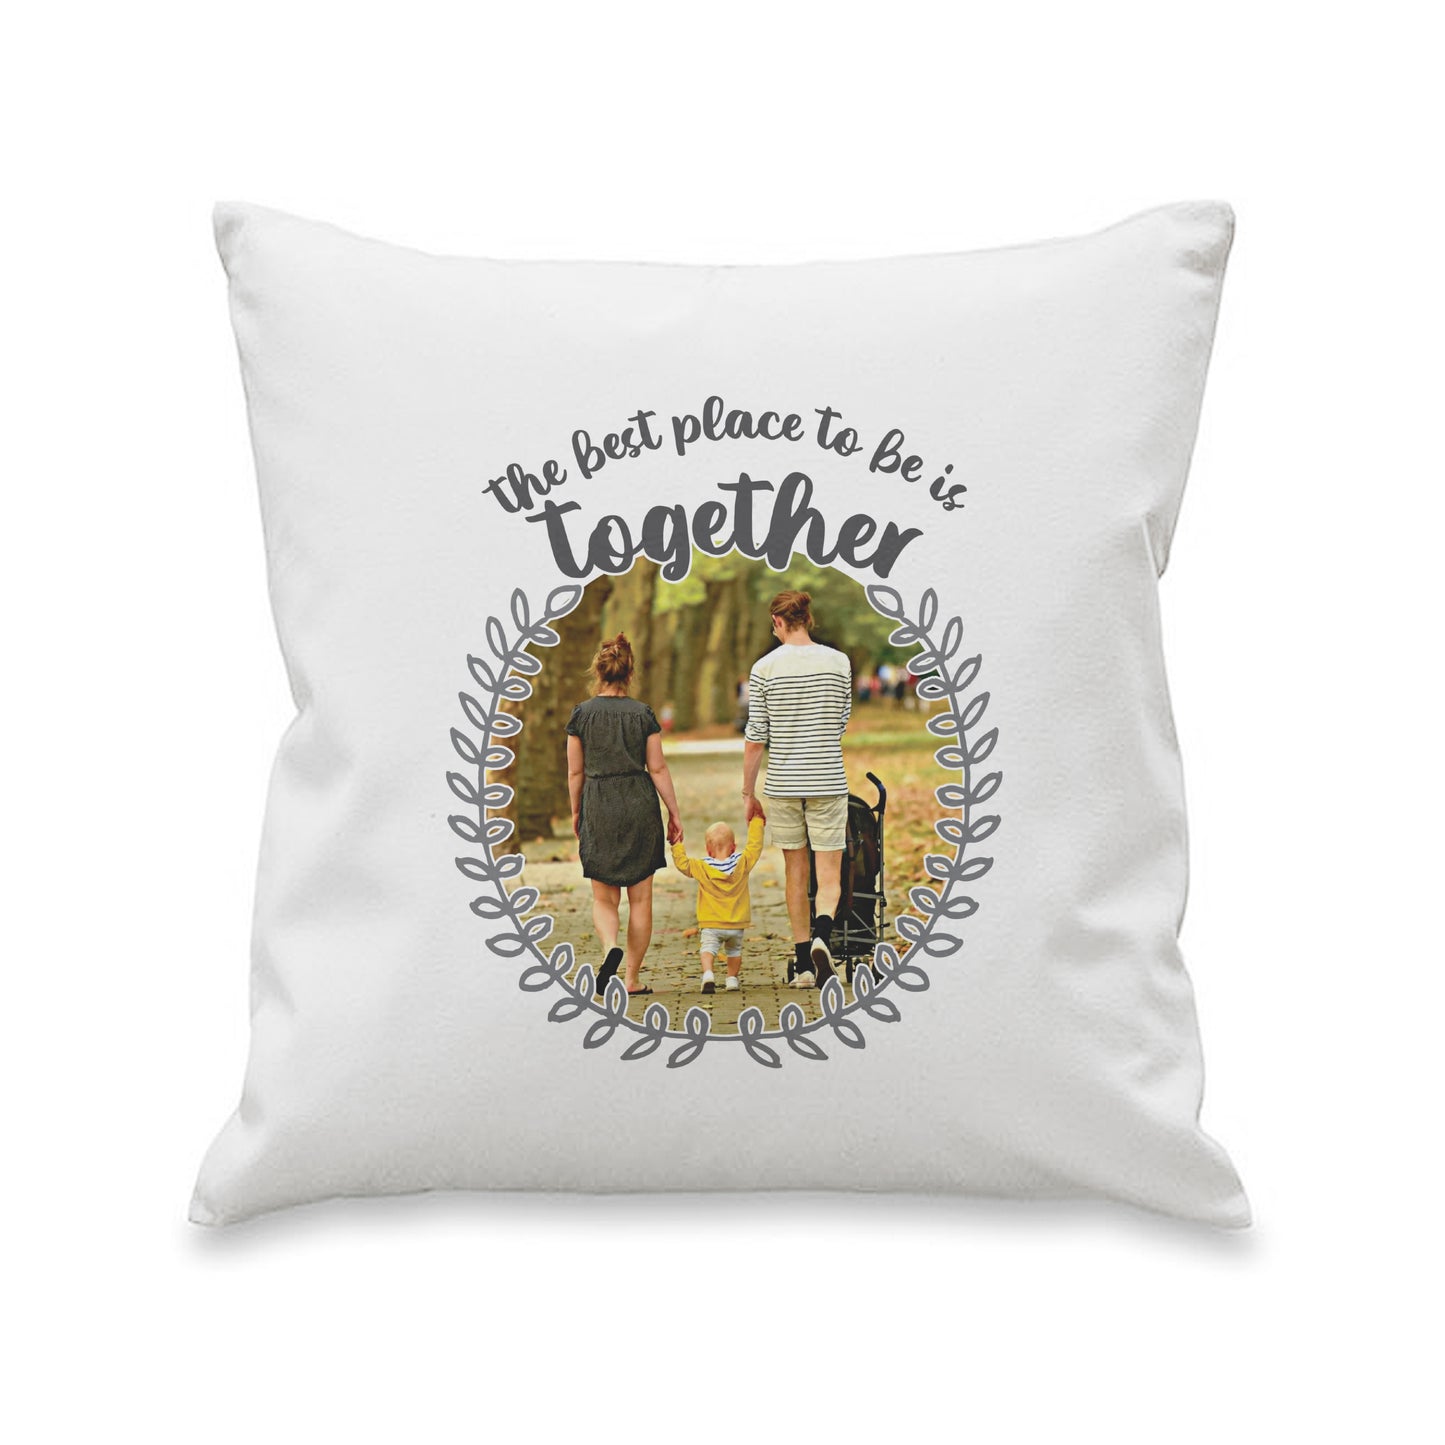 Personalised “The best place to be is together” Cushion - UPLOAD YOUR OWN PHOTO! - Violet Belle Gifts - Personalised “Together is the best place to be” Cushion - UPLOAD YOUR OWN PHOTO!